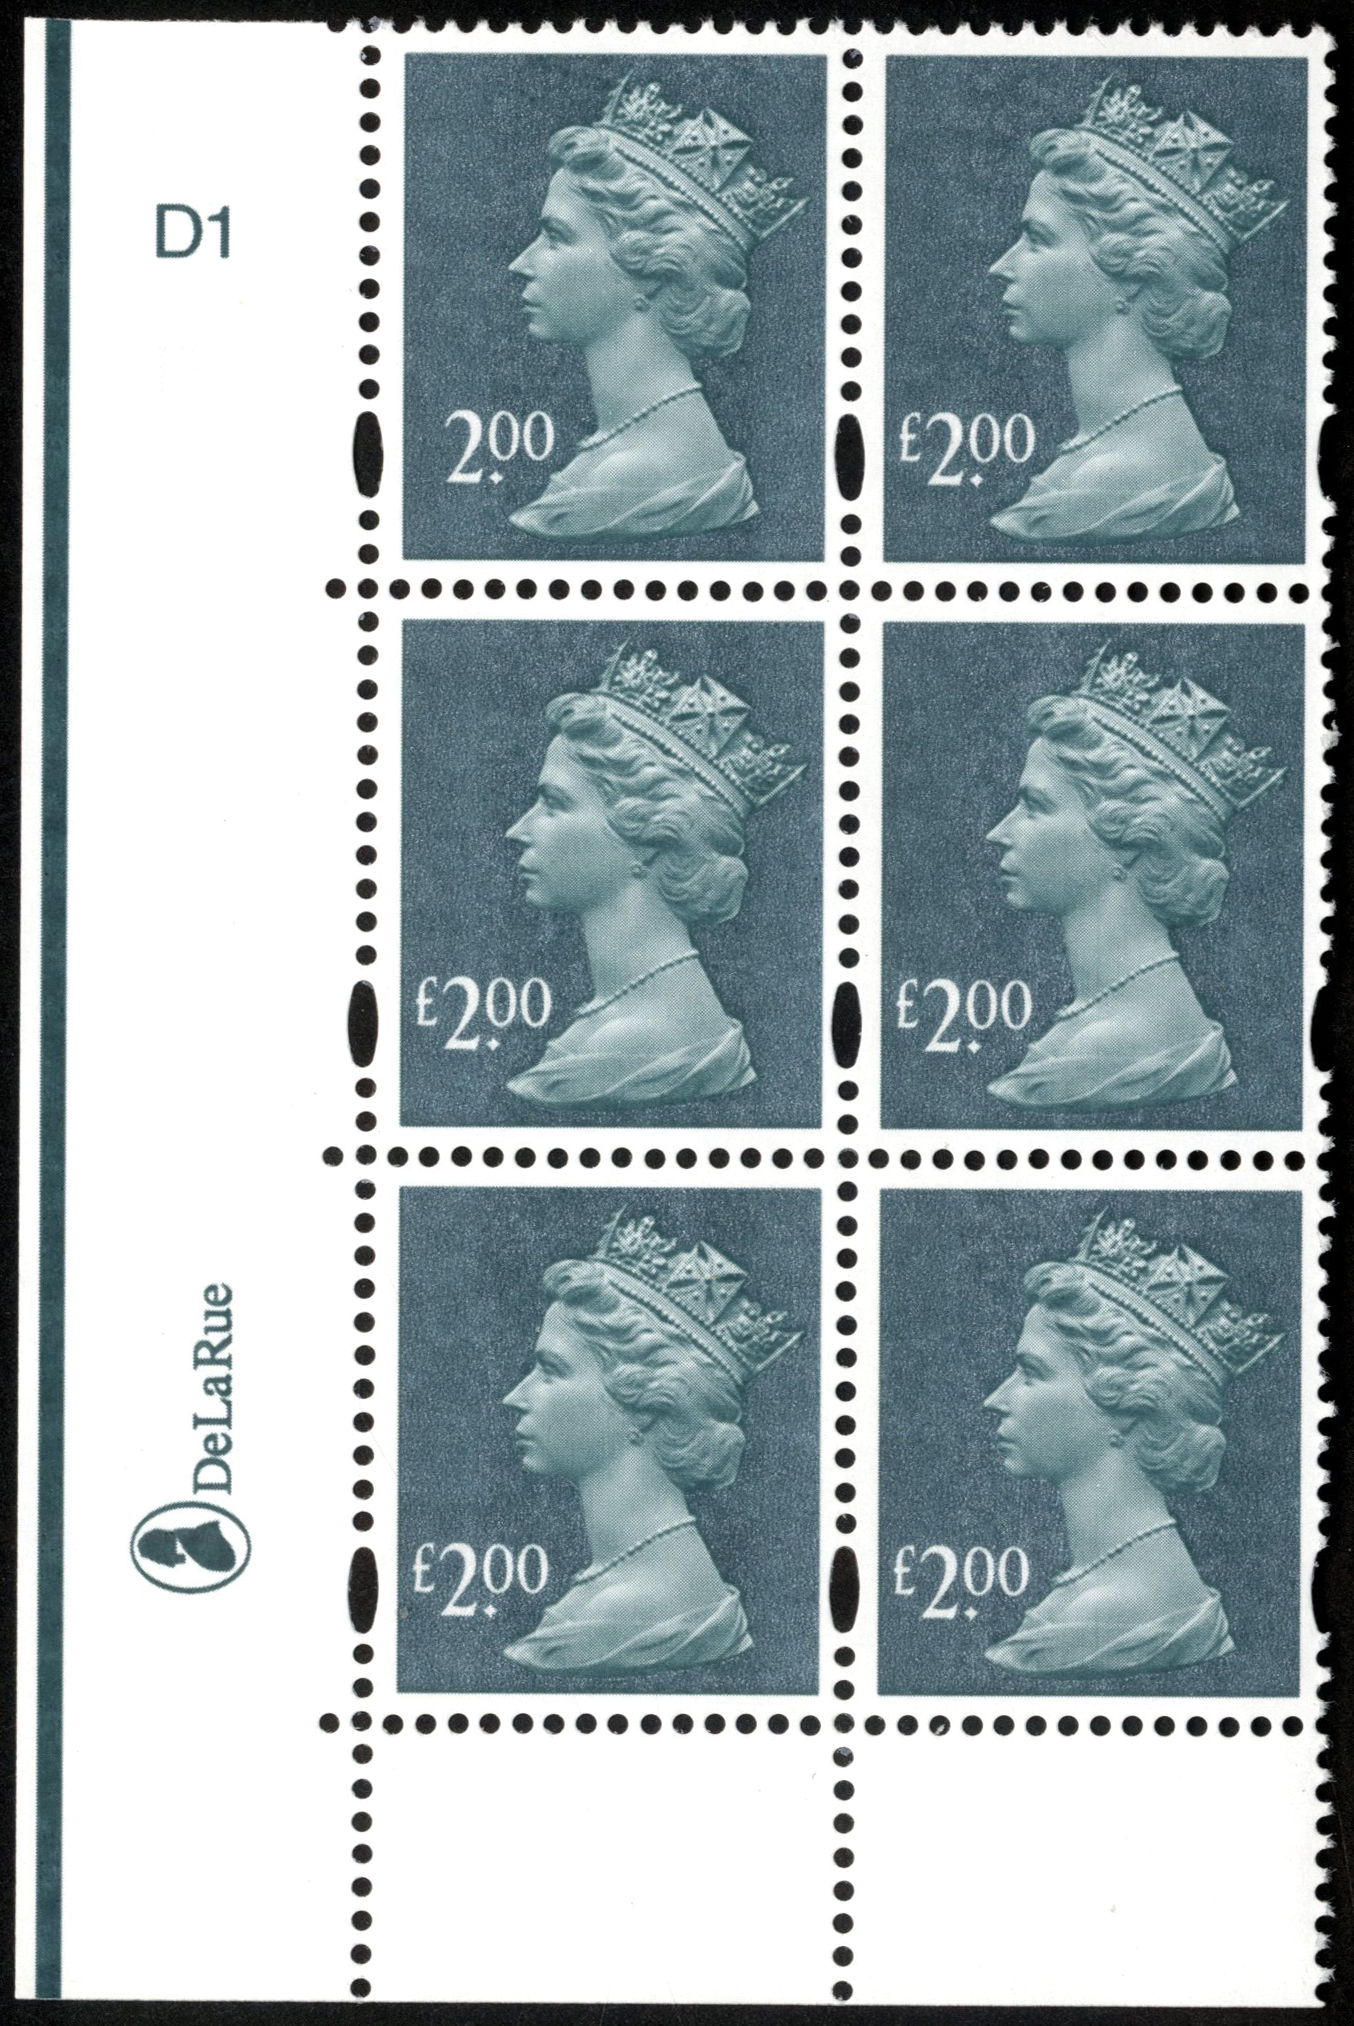 Great Britain. 2003 £2 deep blue-green with elliptical perfs, cylinder D1 block of six with R18/1